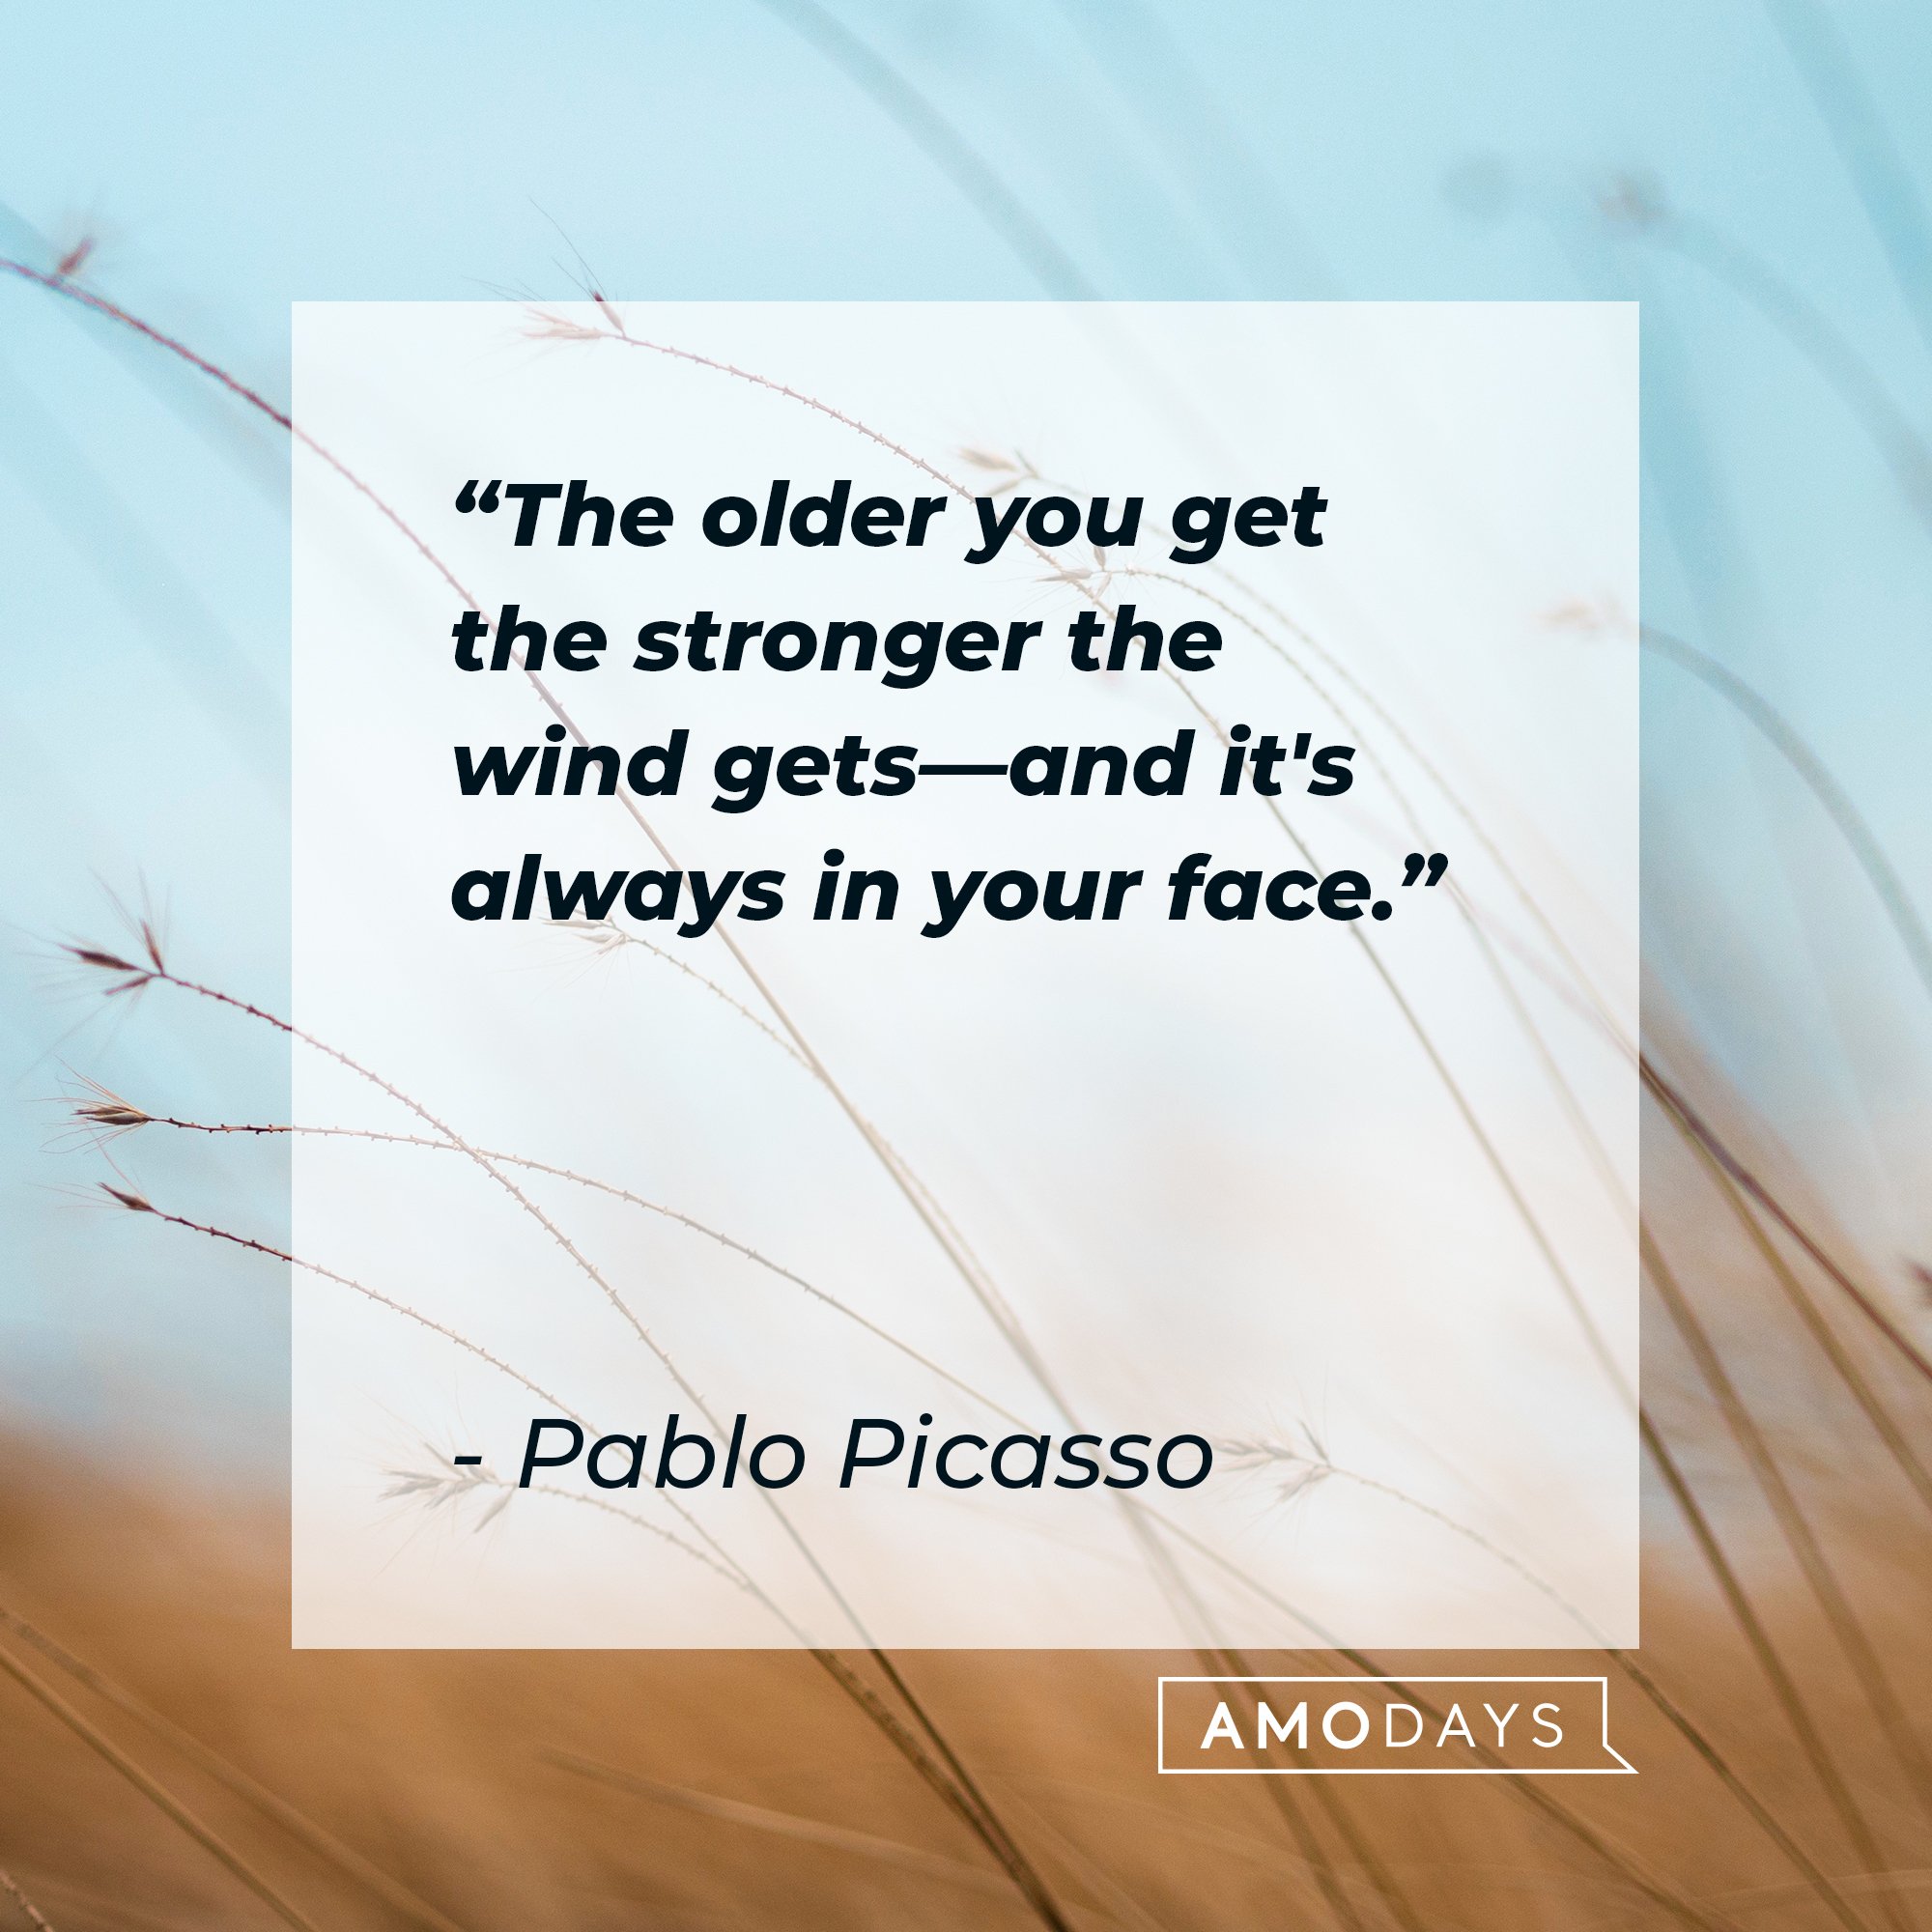 Pablo Picasso's quote: "The older you get the stronger the wind gets - and it's always in your face." | Image: AmoDays